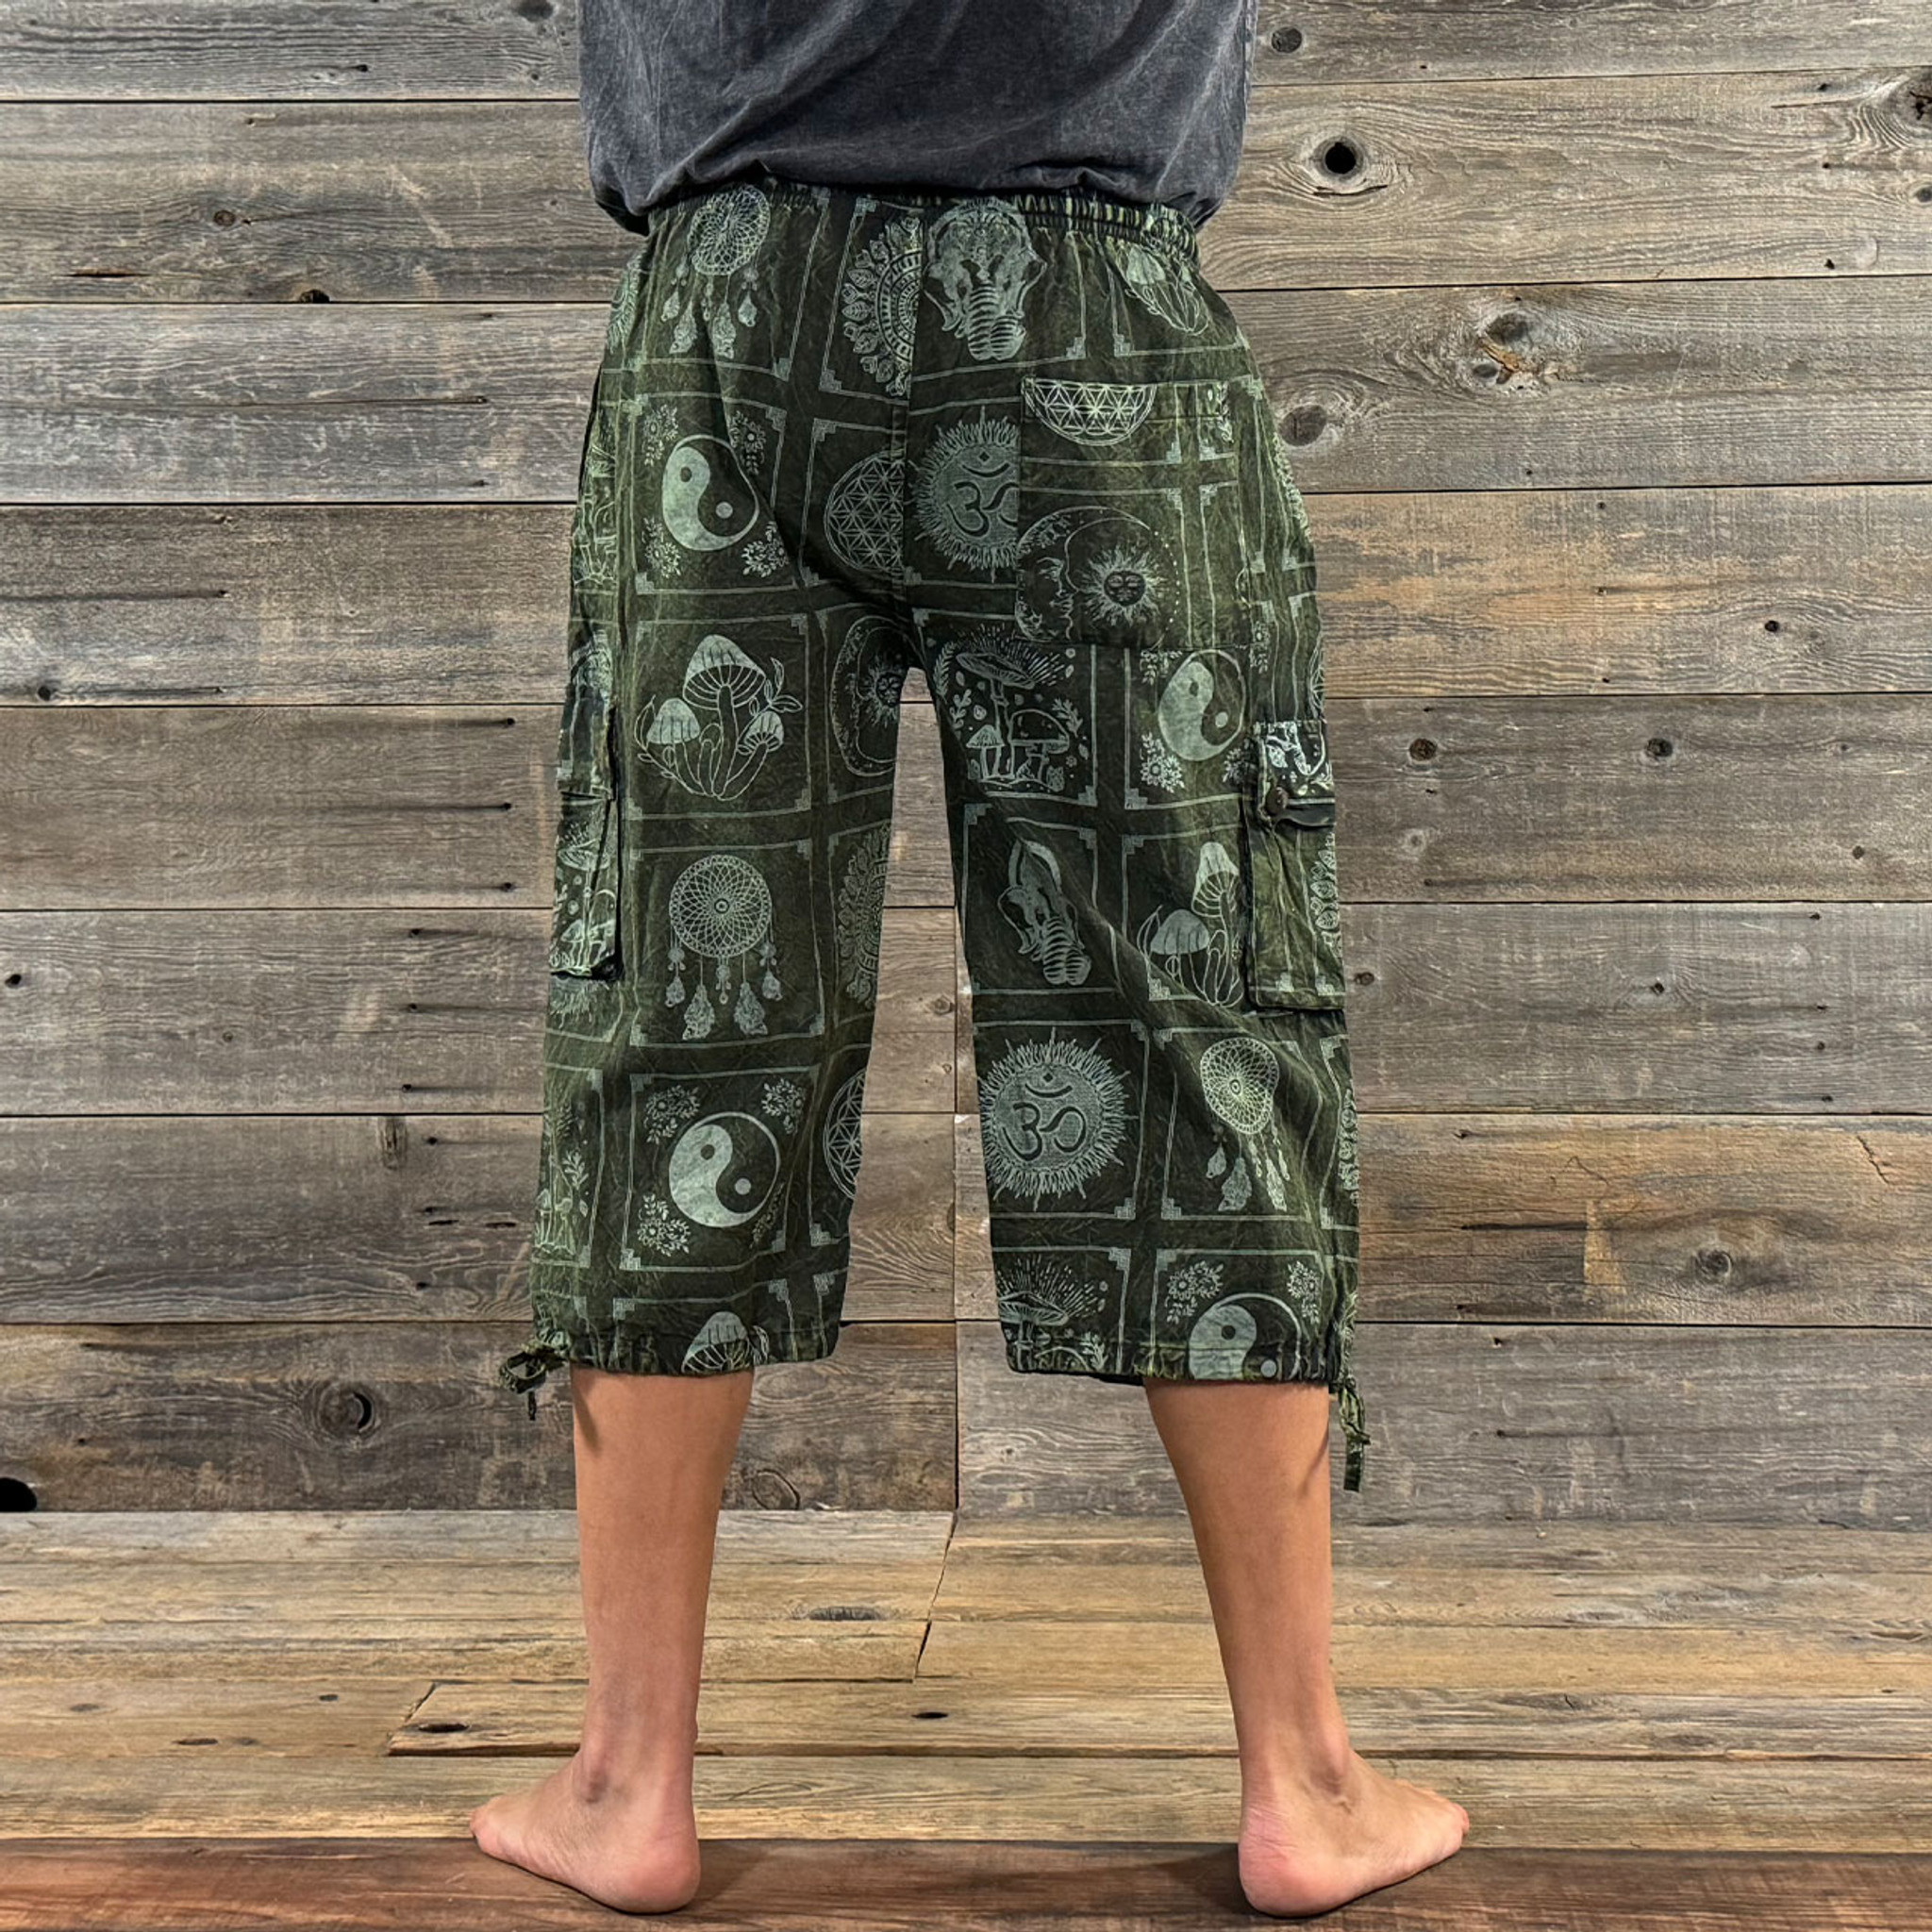 A LITTLE BIT OF EVERYTHING DIGGERS Cotton Enzyme Dye Clam Diggers - 3/4 Pants w/ Multi Print